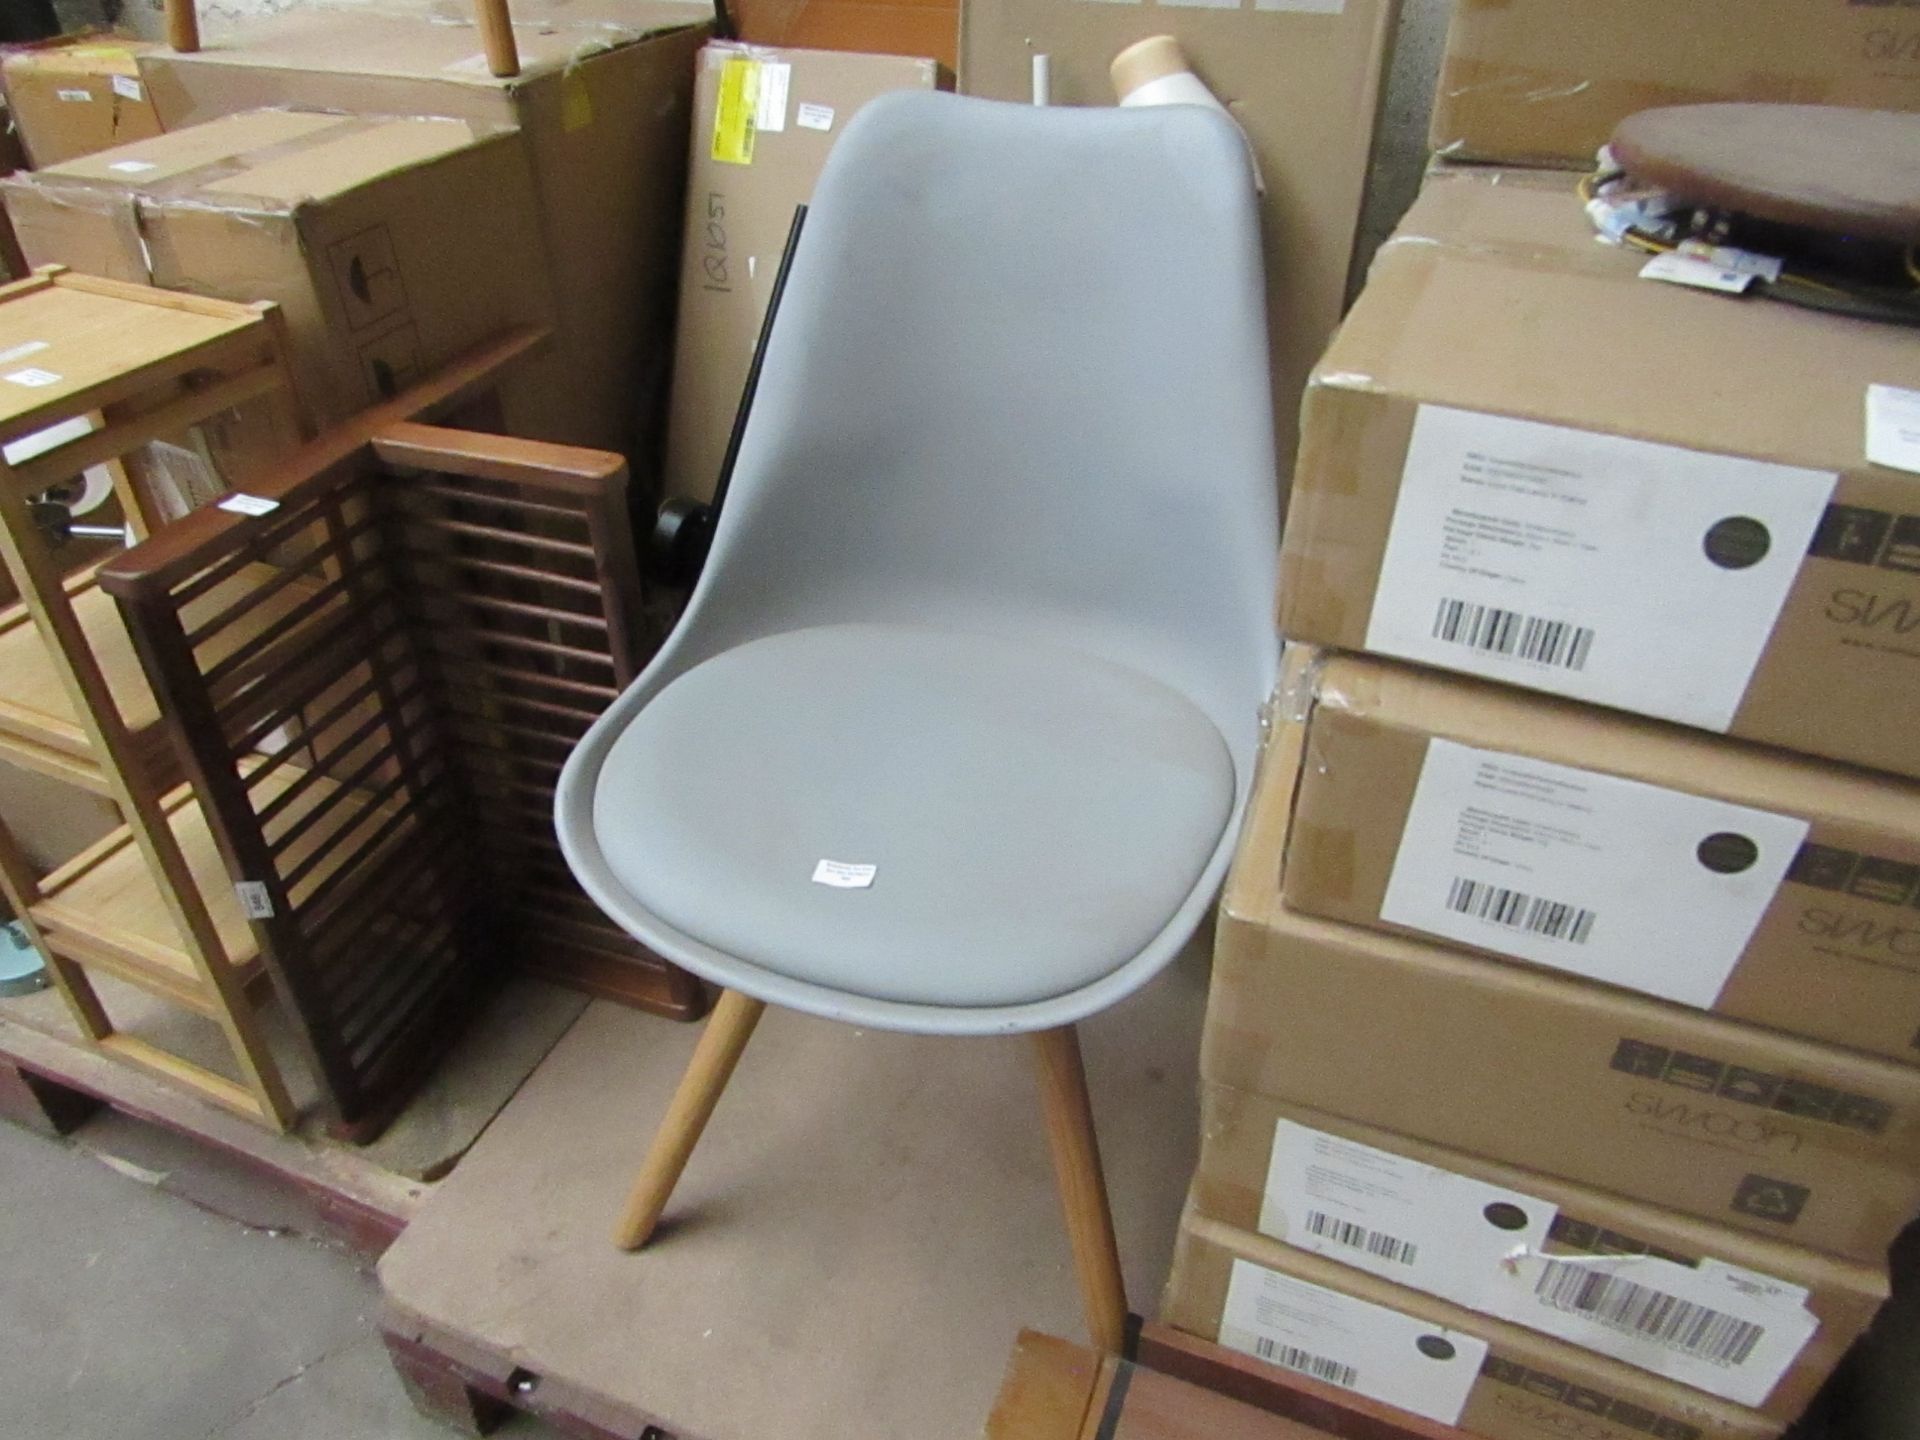 | 1X | MADE.COM THELMA OFFICE CHAIR | FEW MARKS ON COULD DO WITH A CLEAN | RRP £99 |